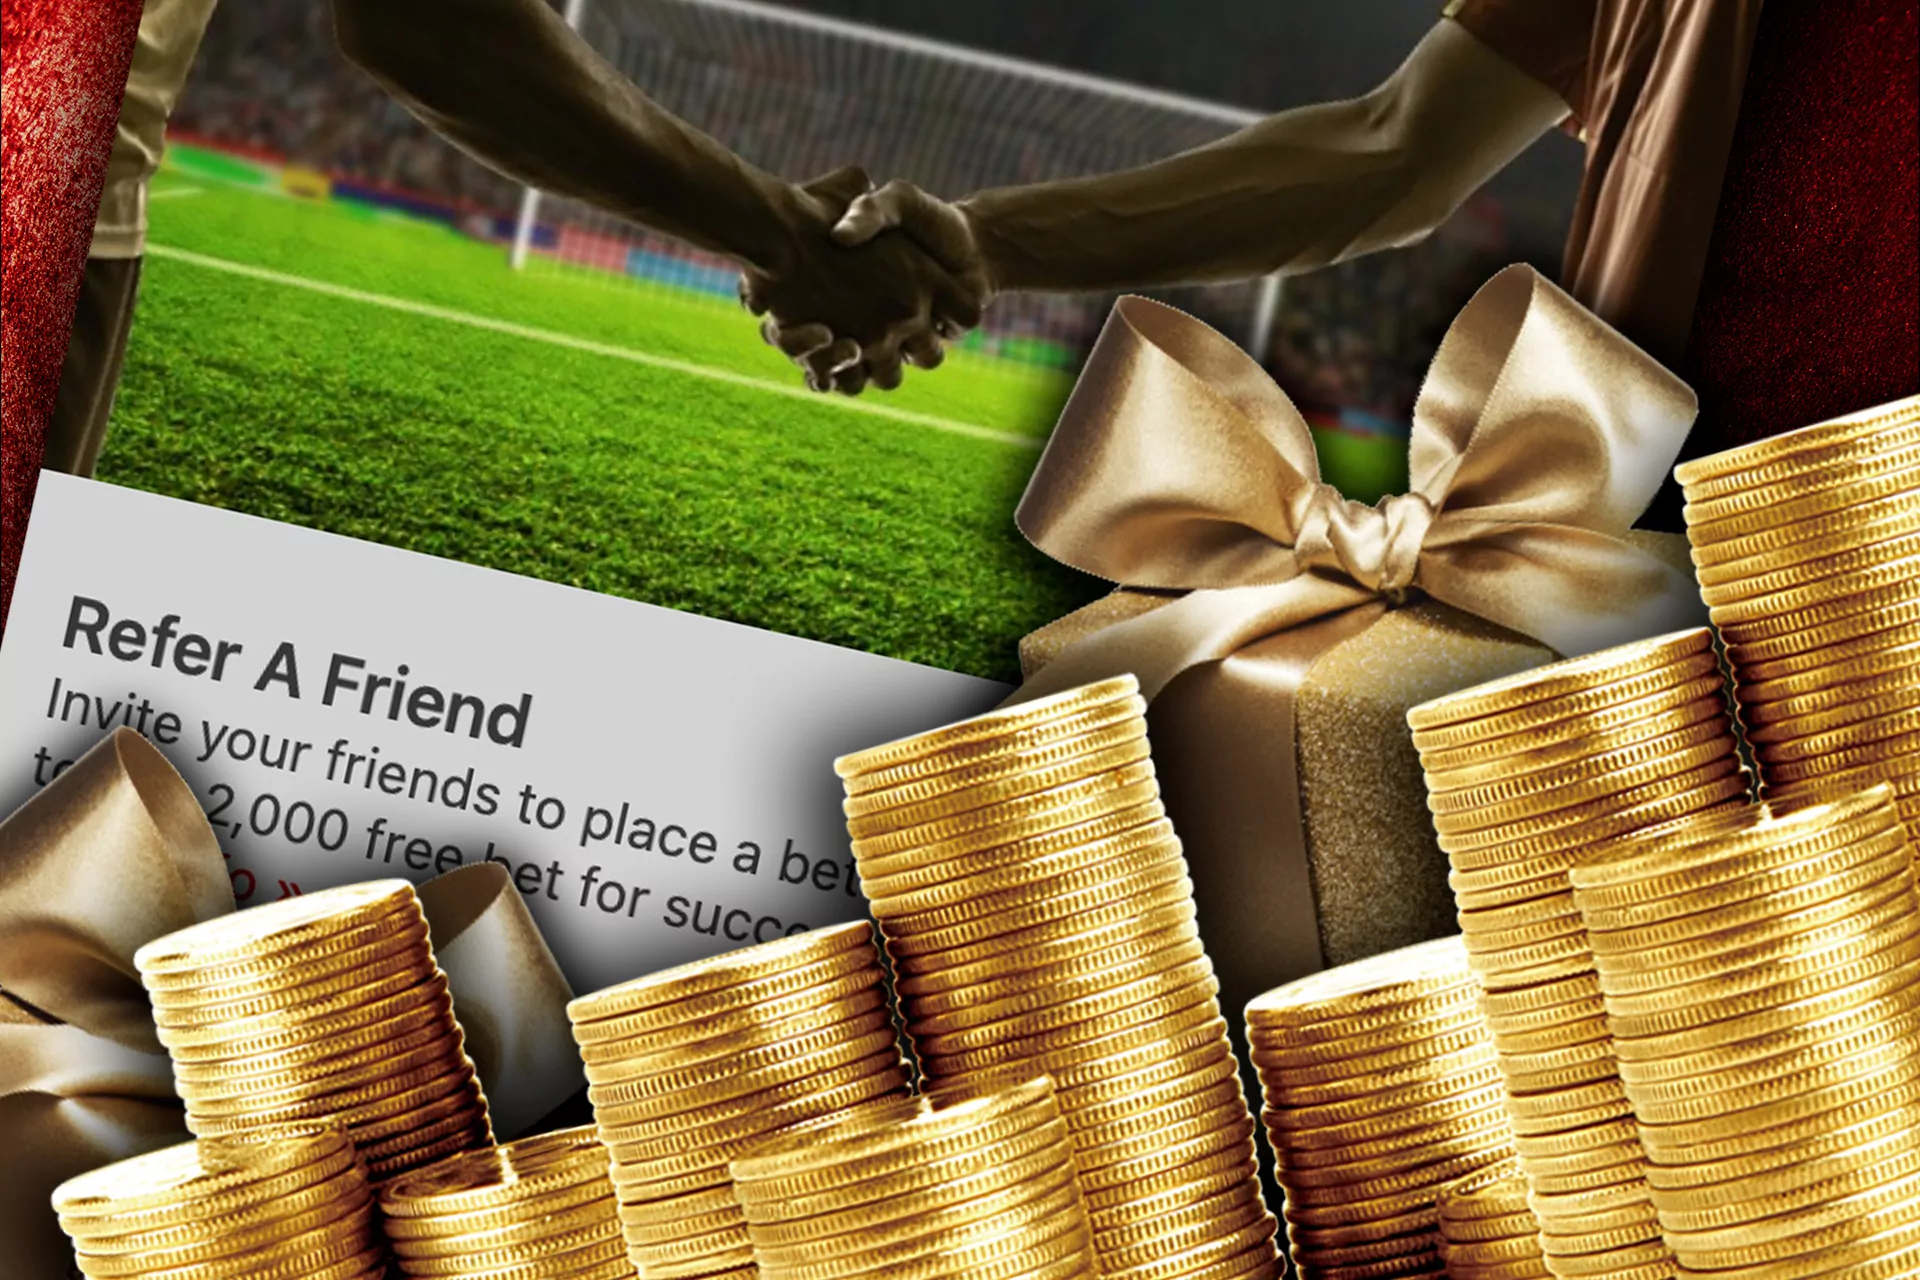 There is a referral program at Dafabet at which you can share your bets on cricket with your friends.